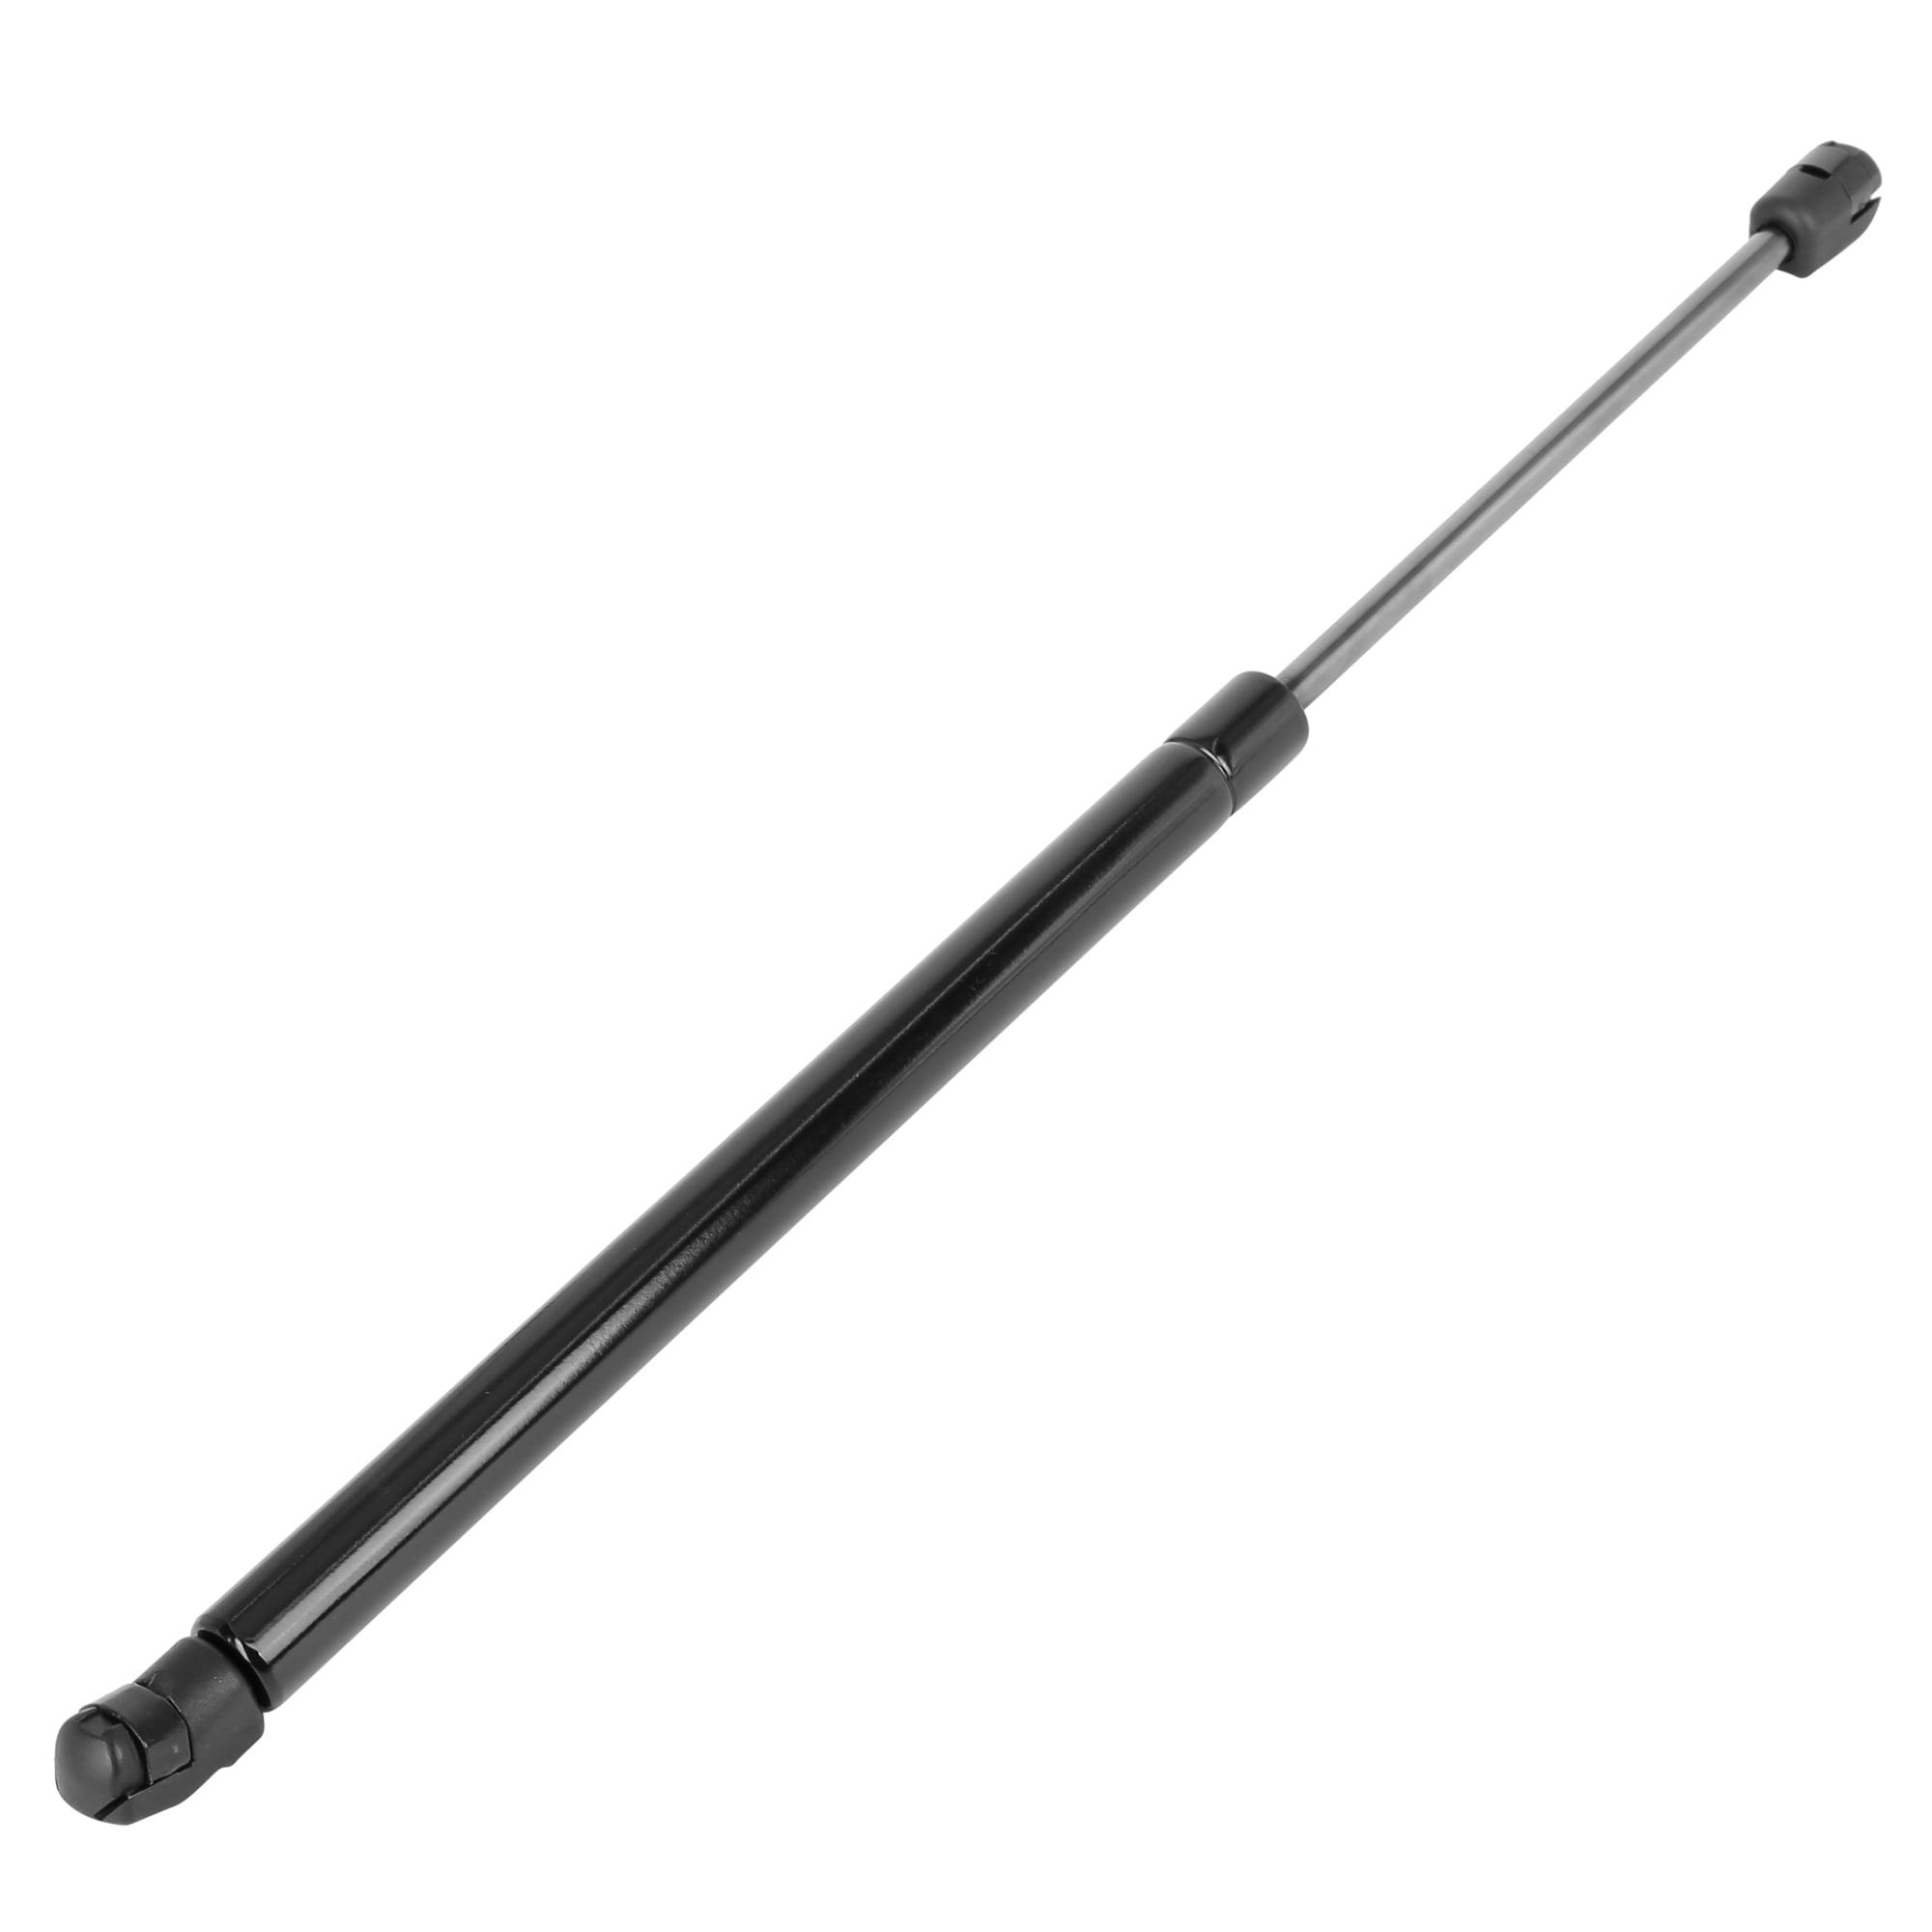 2Pcs Front HOOD Struts Lift Supports Shock Gas Spring Prop Rod Compatible With KIA 2011-2015 SORENTO Note: Sport Utility 4-Door